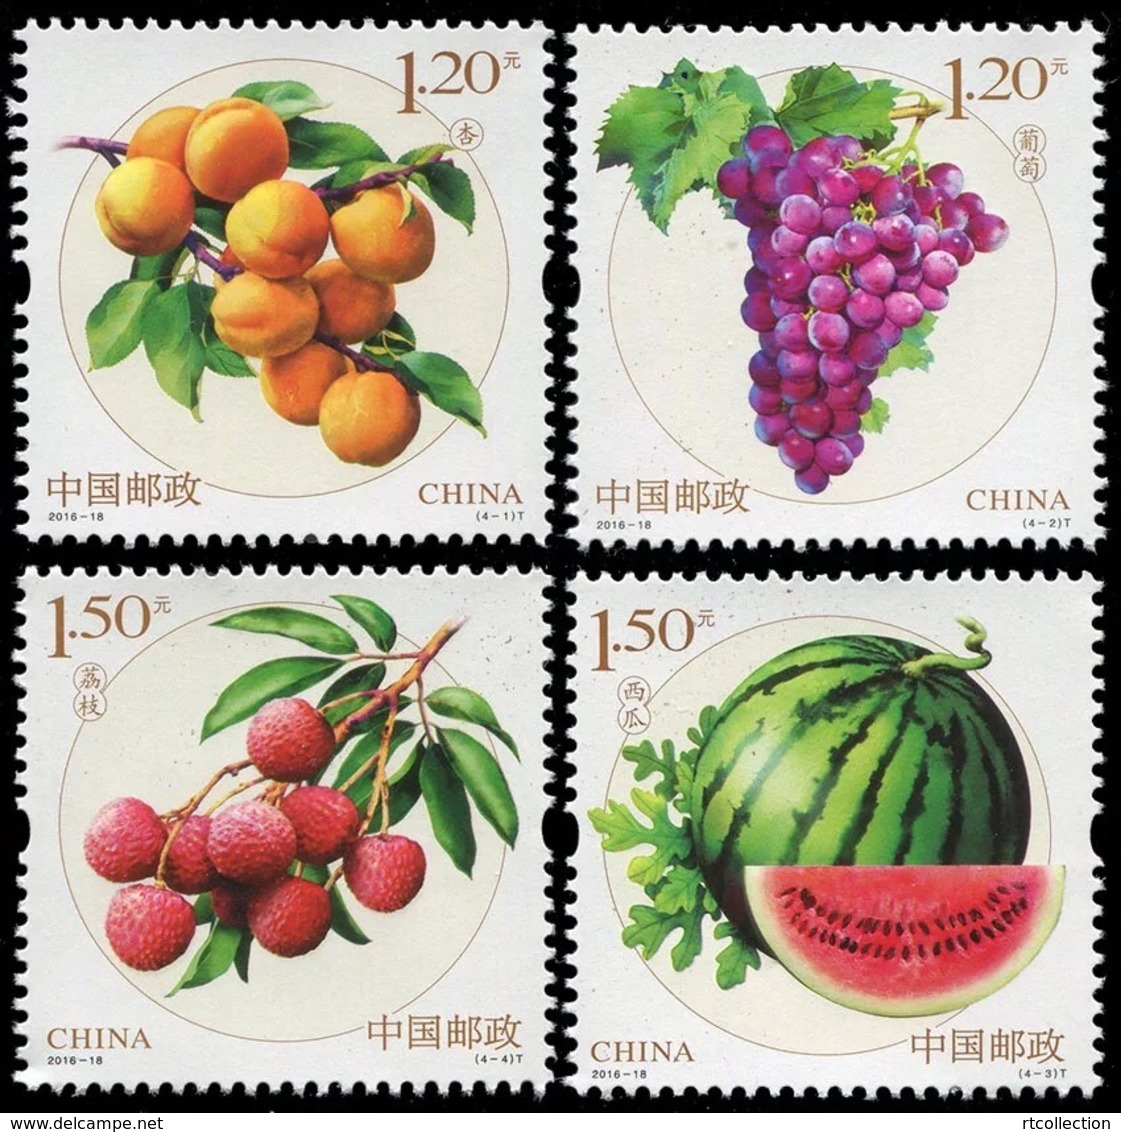 China 2016 2016-18 Special Stamps Fruits II Grapes Apricots Water Melon Lychees Series No. 2 Plants Food Nature V4 MNH - Food